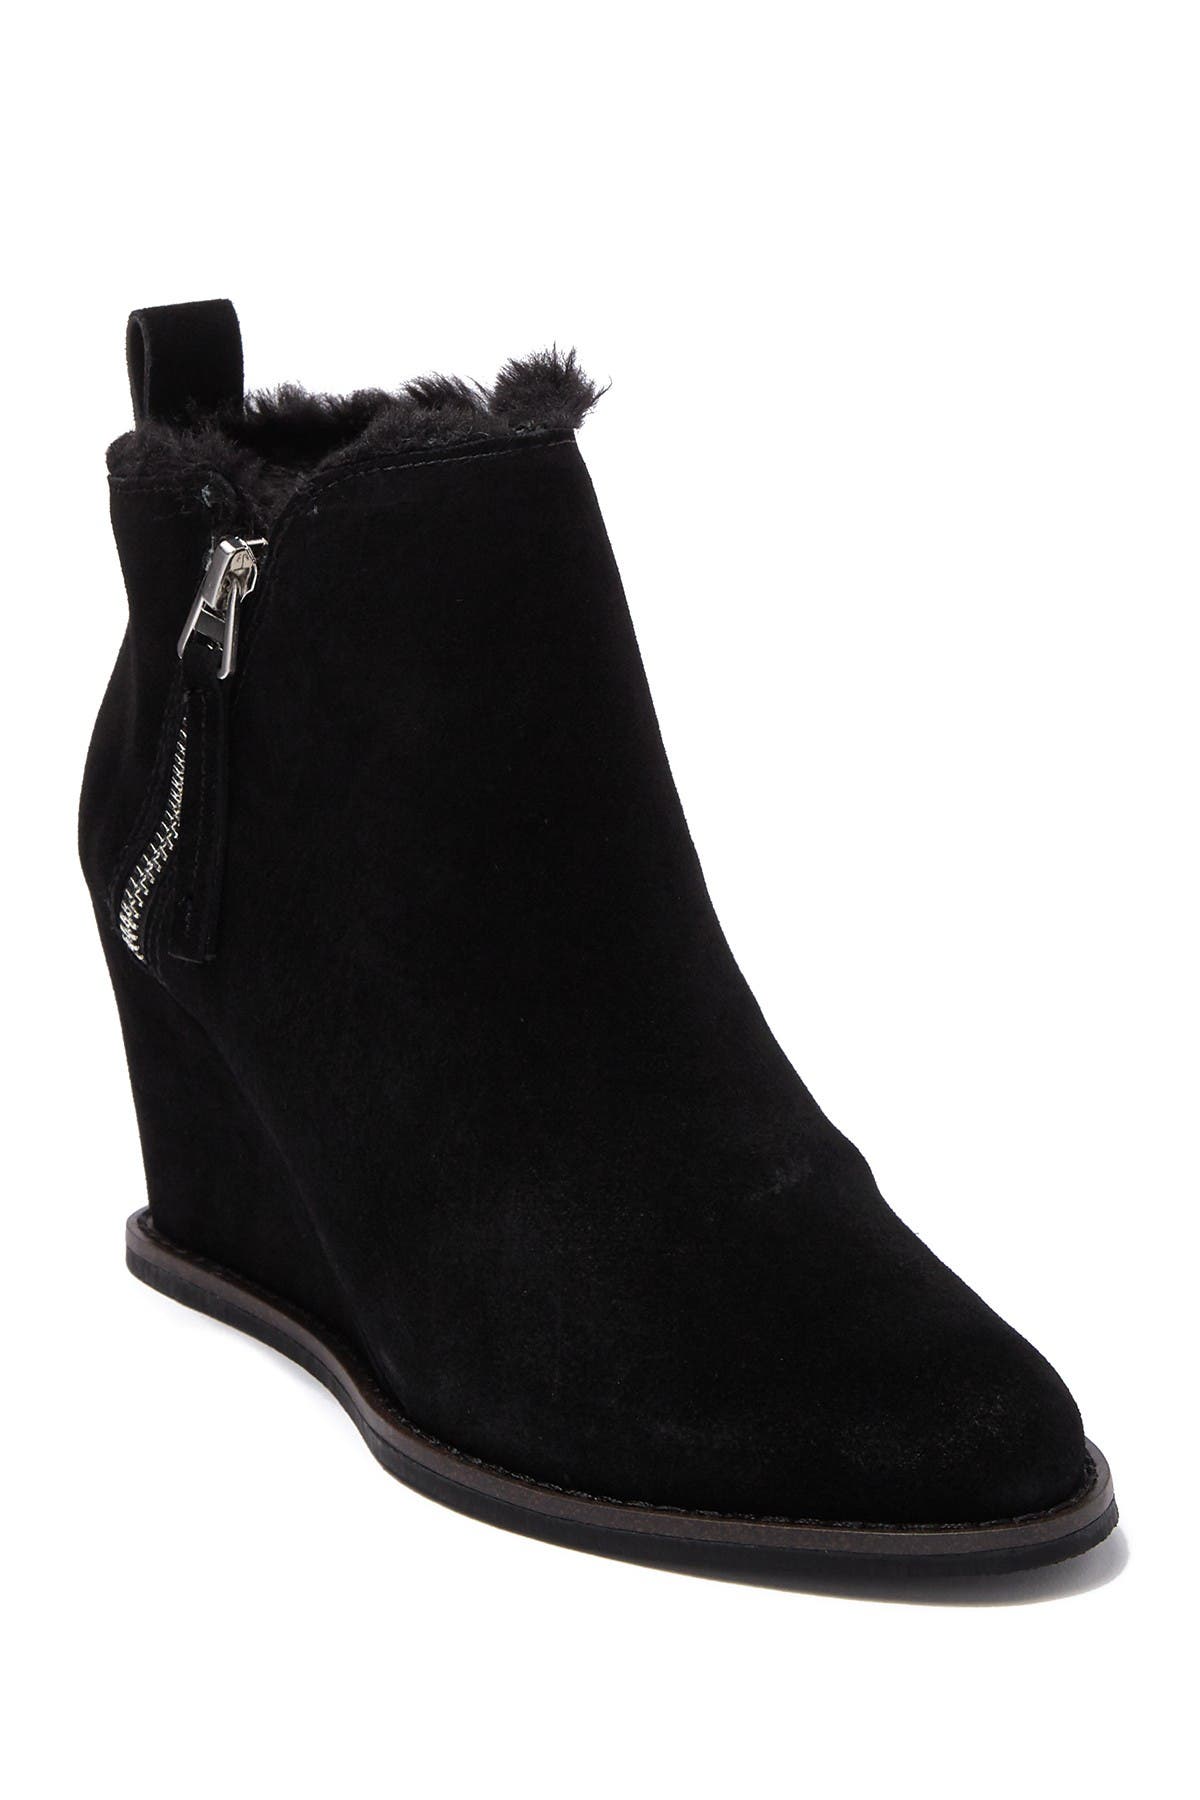 Dolce Vita | Gill Faux Fur Lined Wedge 